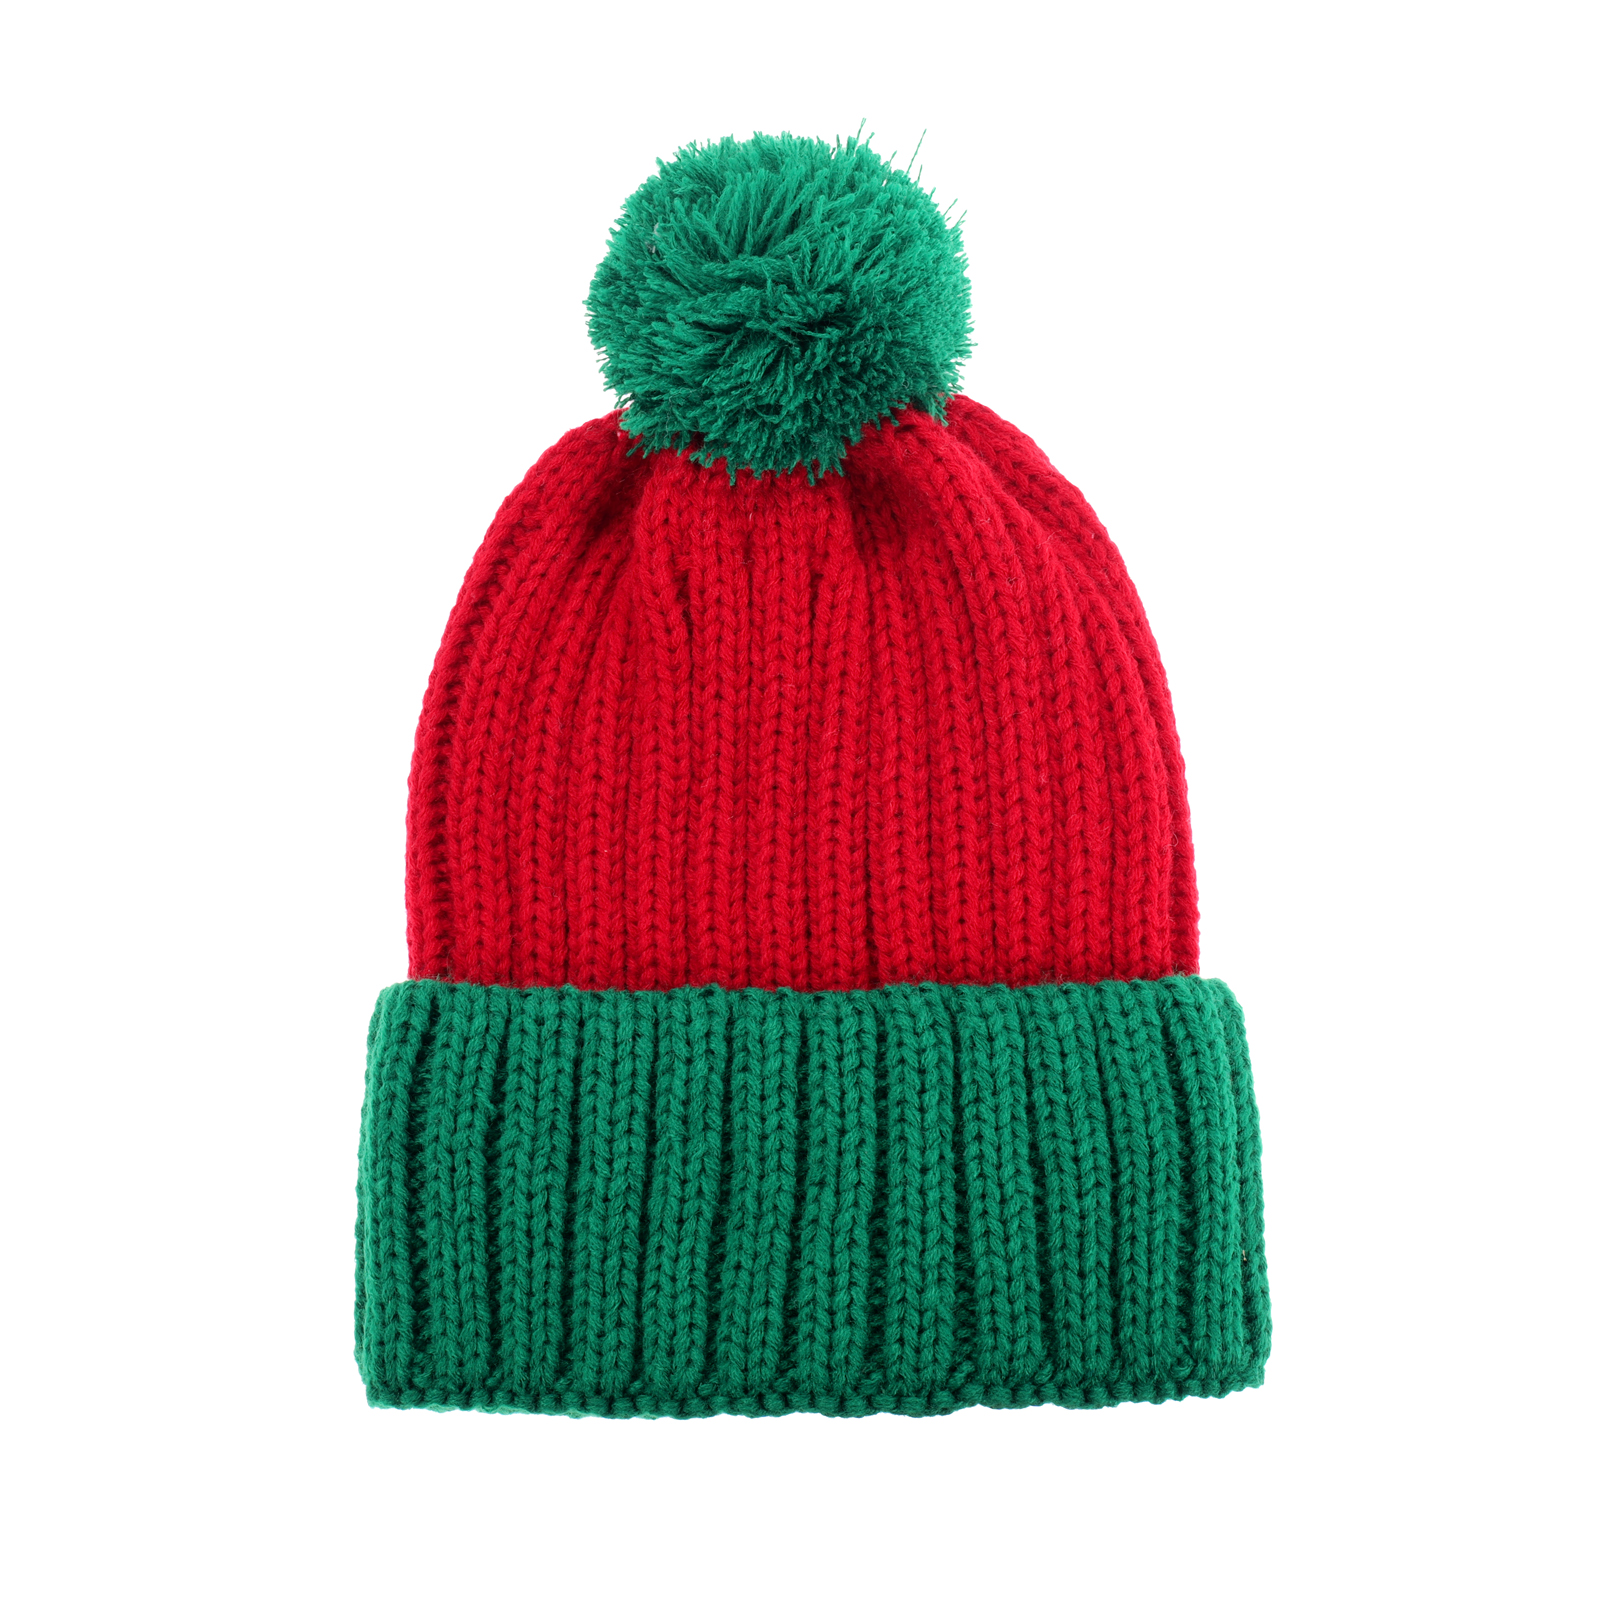 Coarse knit red/green